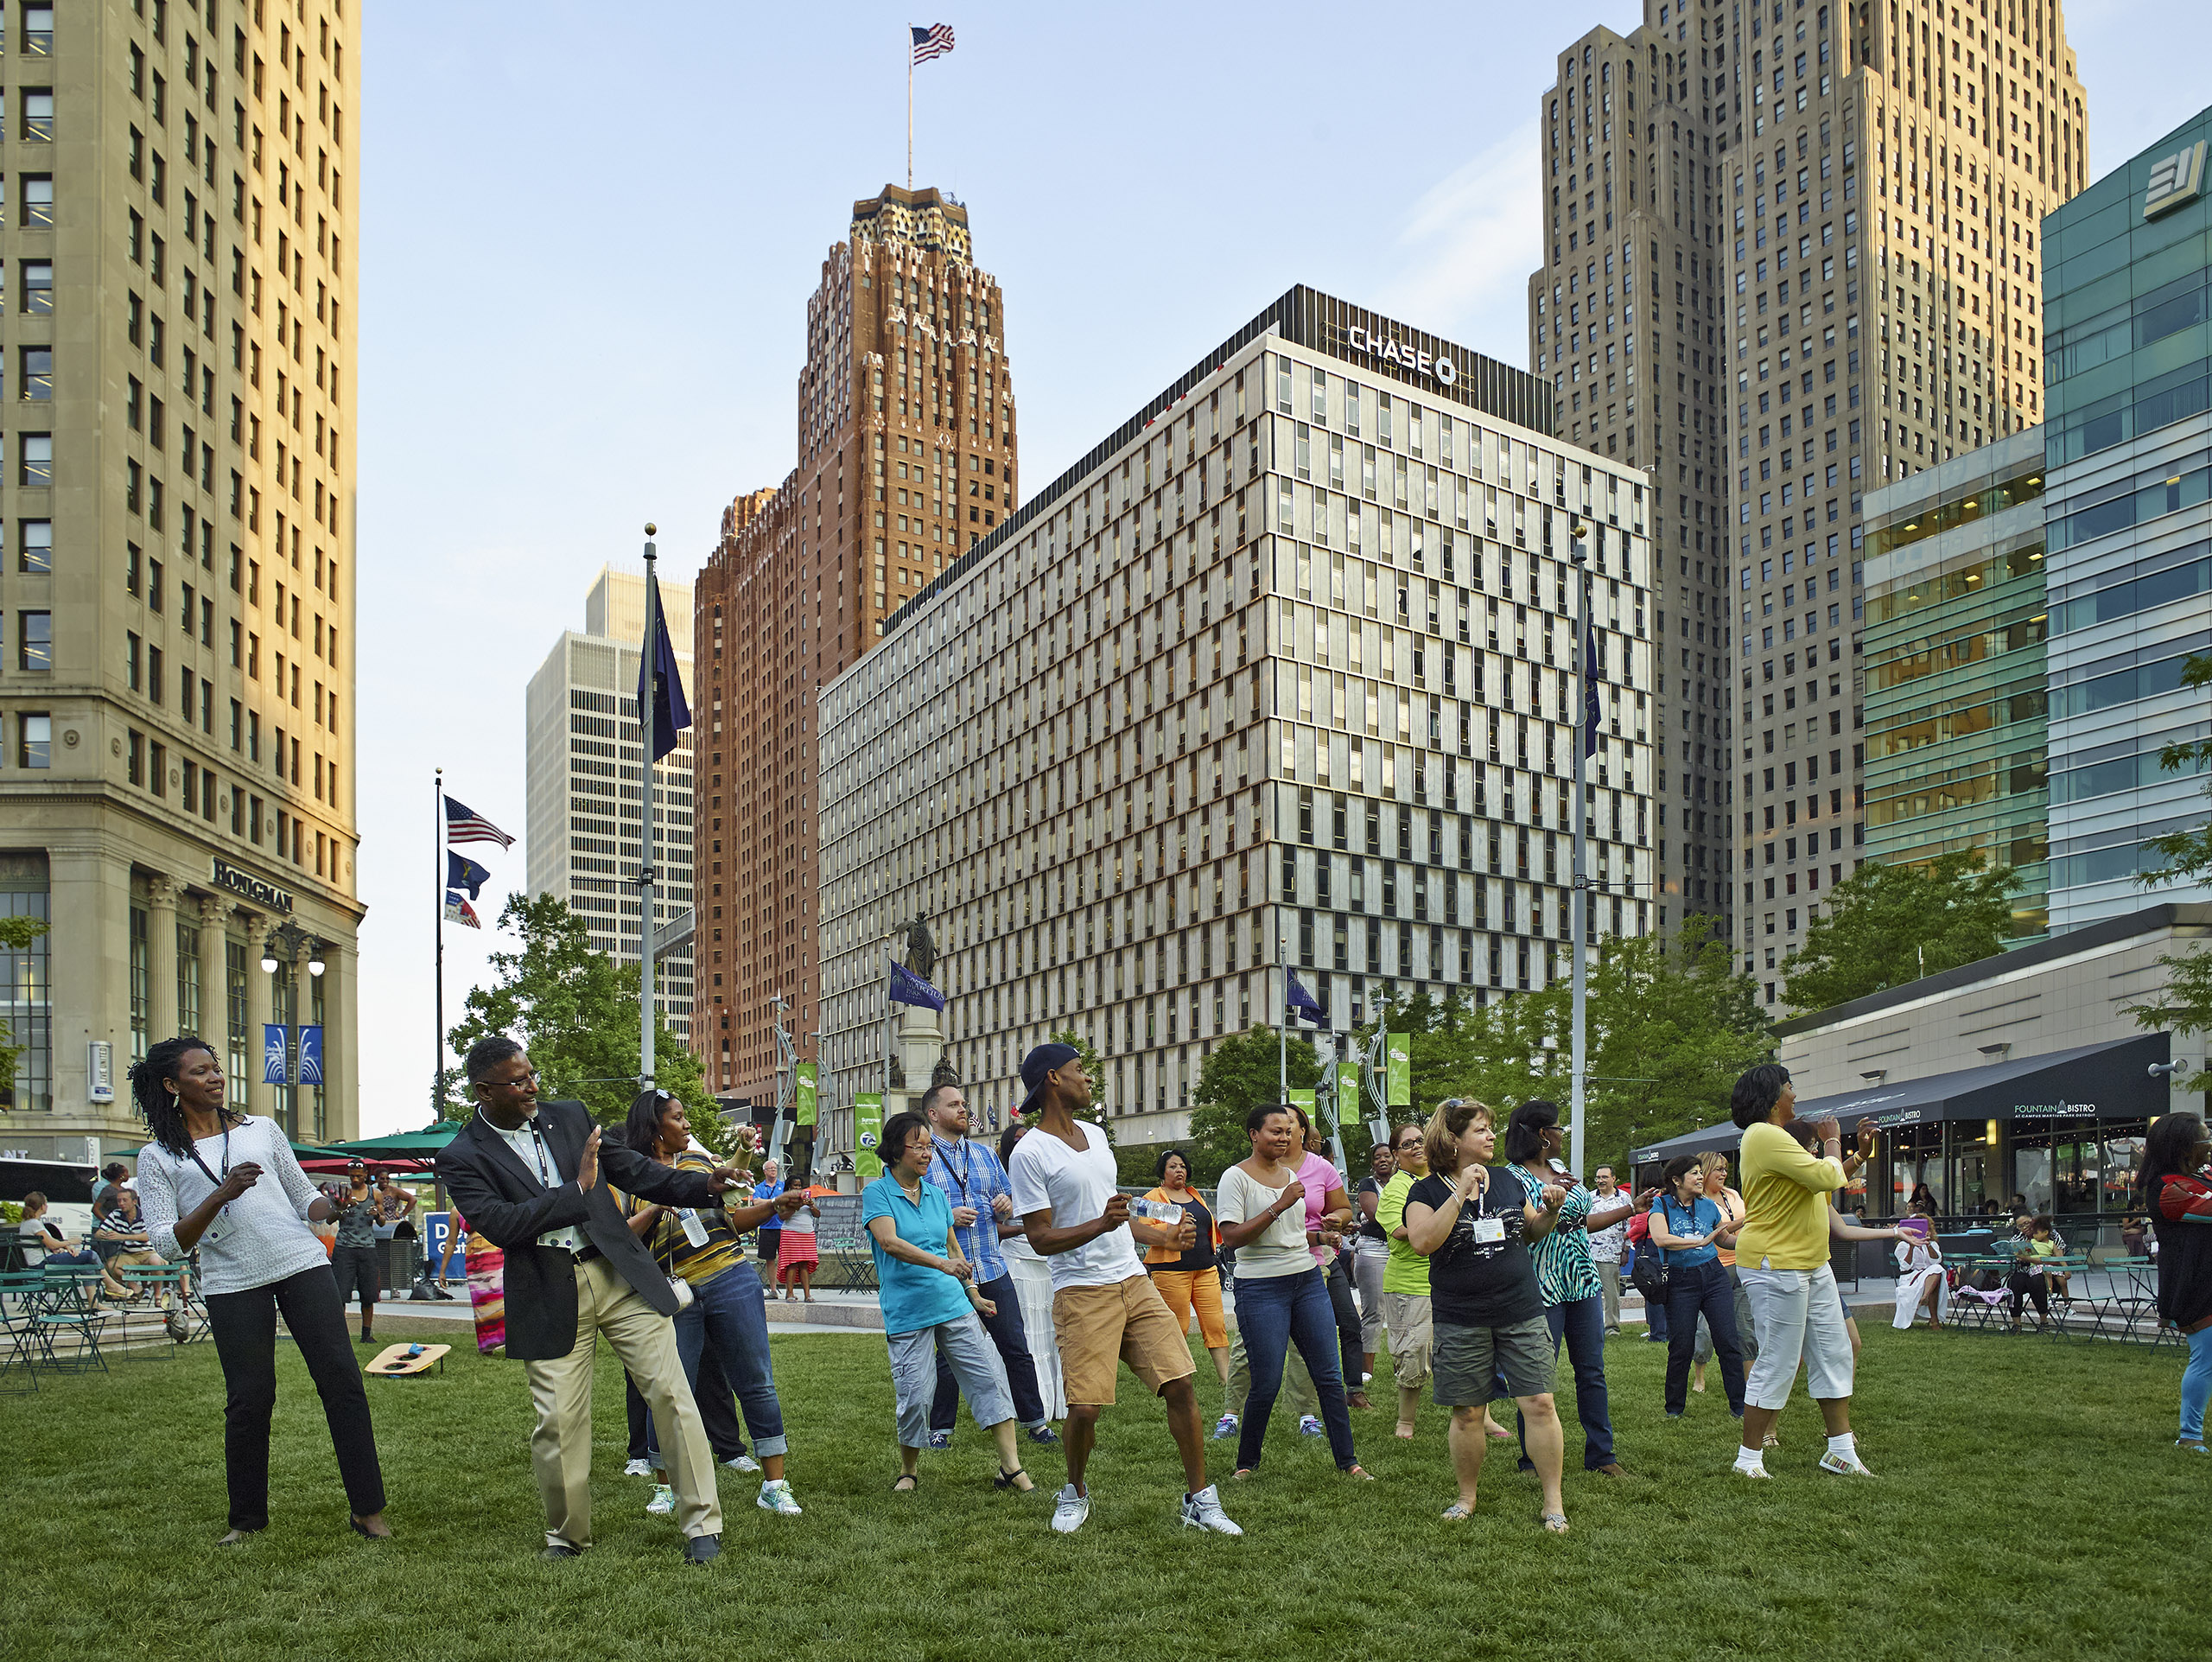 A group of diversity activists celebrate at a downtown Detroit park (Photograph by Andrew Moore)